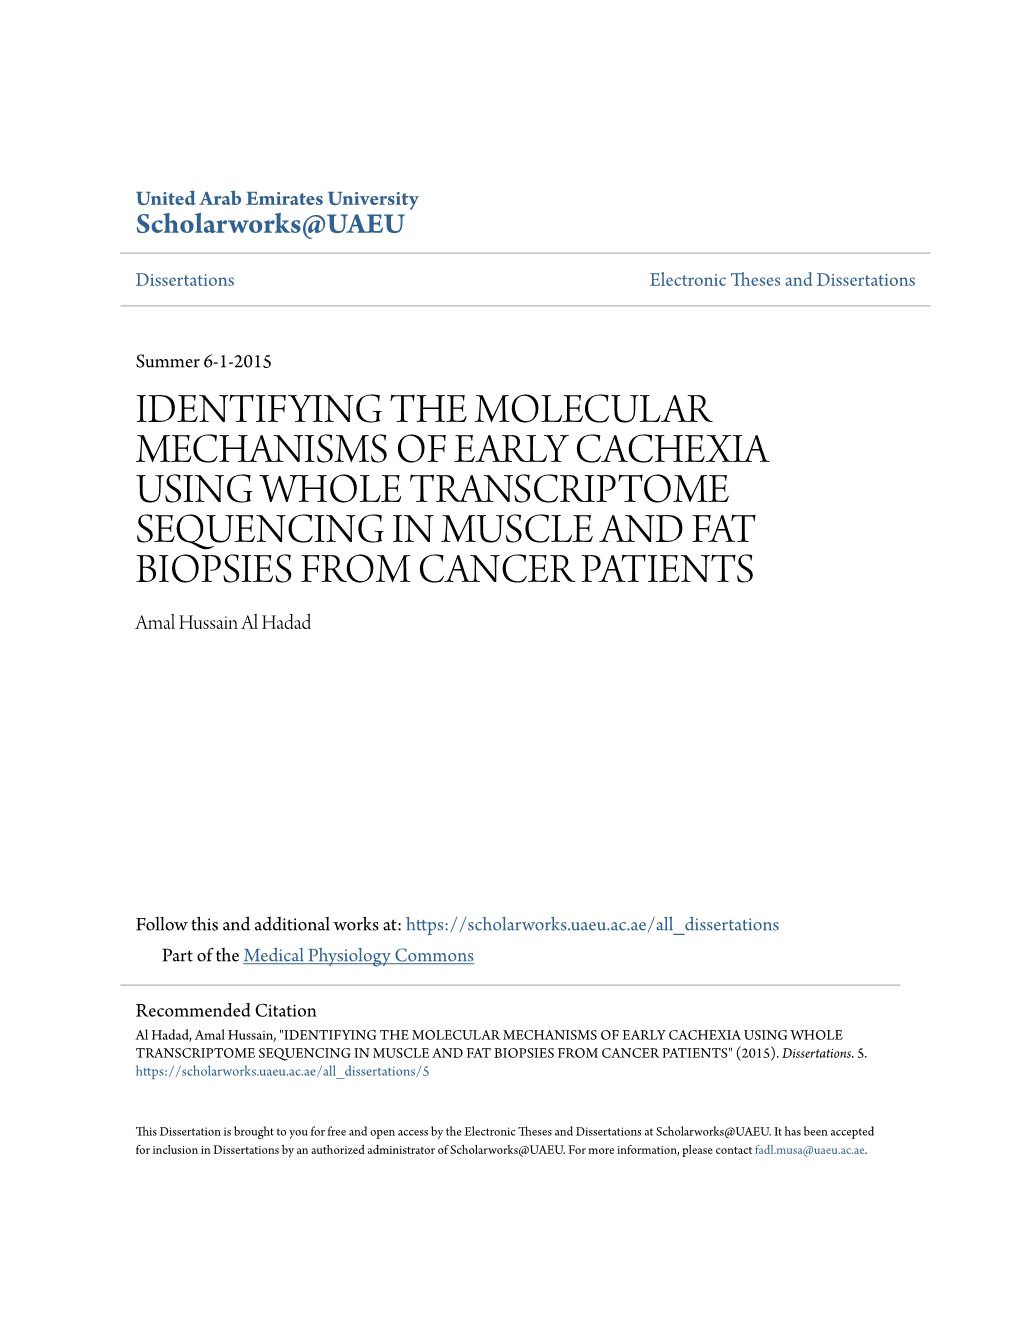 IDENTIFYING the MOLECULAR MECHANISMS of EARLY CACHEXIA USING WHOLE TRANSCRIPTOME SEQUENCING in MUSCLE and FAT BIOPSIES from CANCER PATIENTS Amal Hussain Al Hadad